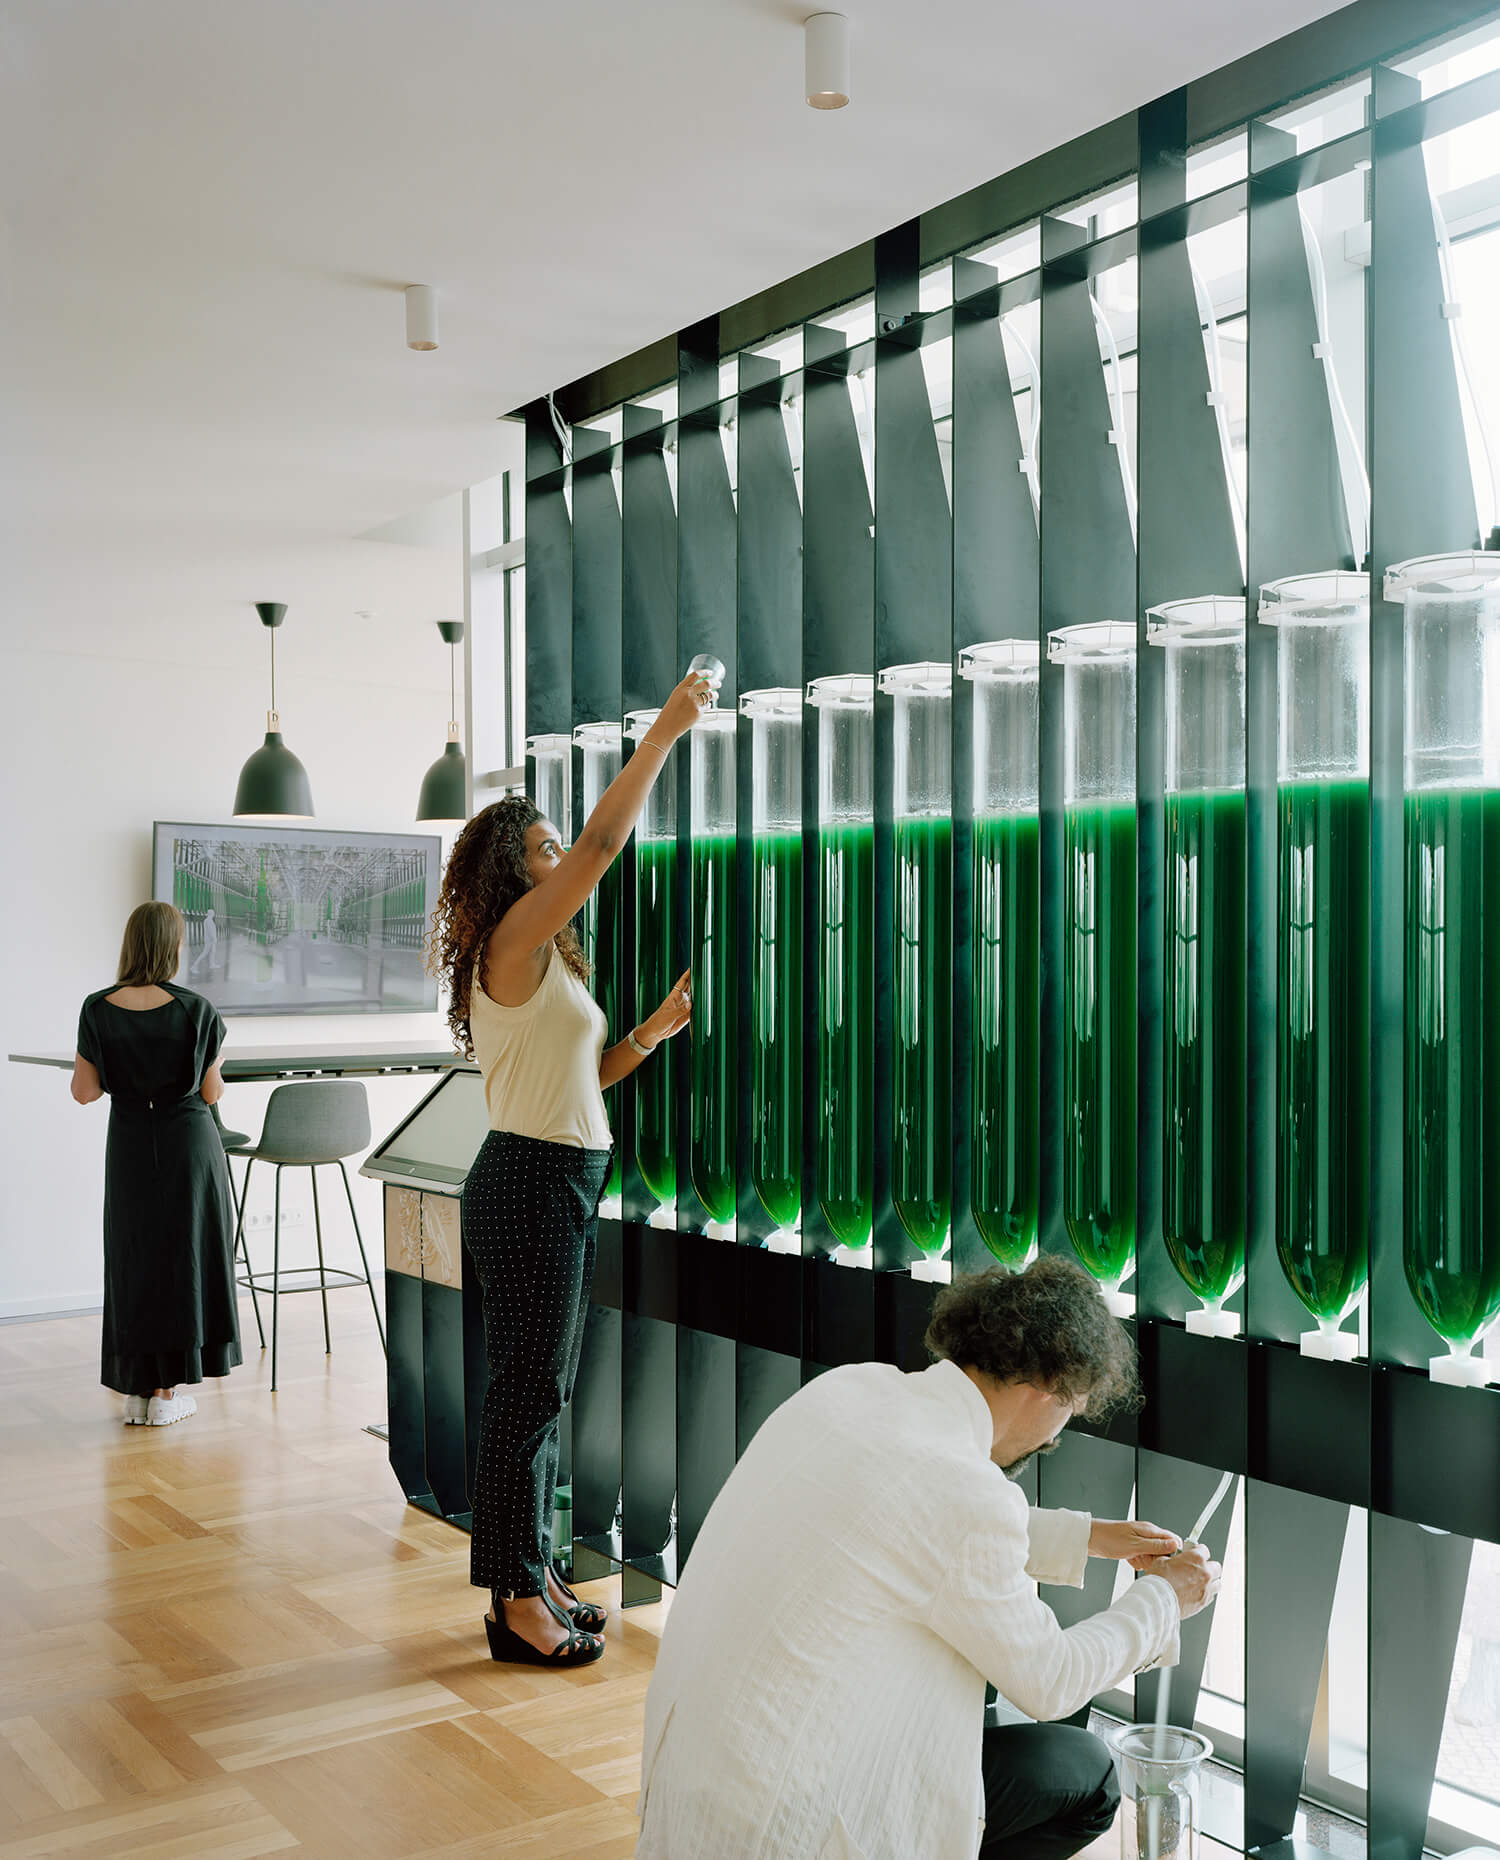 A row of green tubes with someone pouring in the top and another person filtering at the bottom